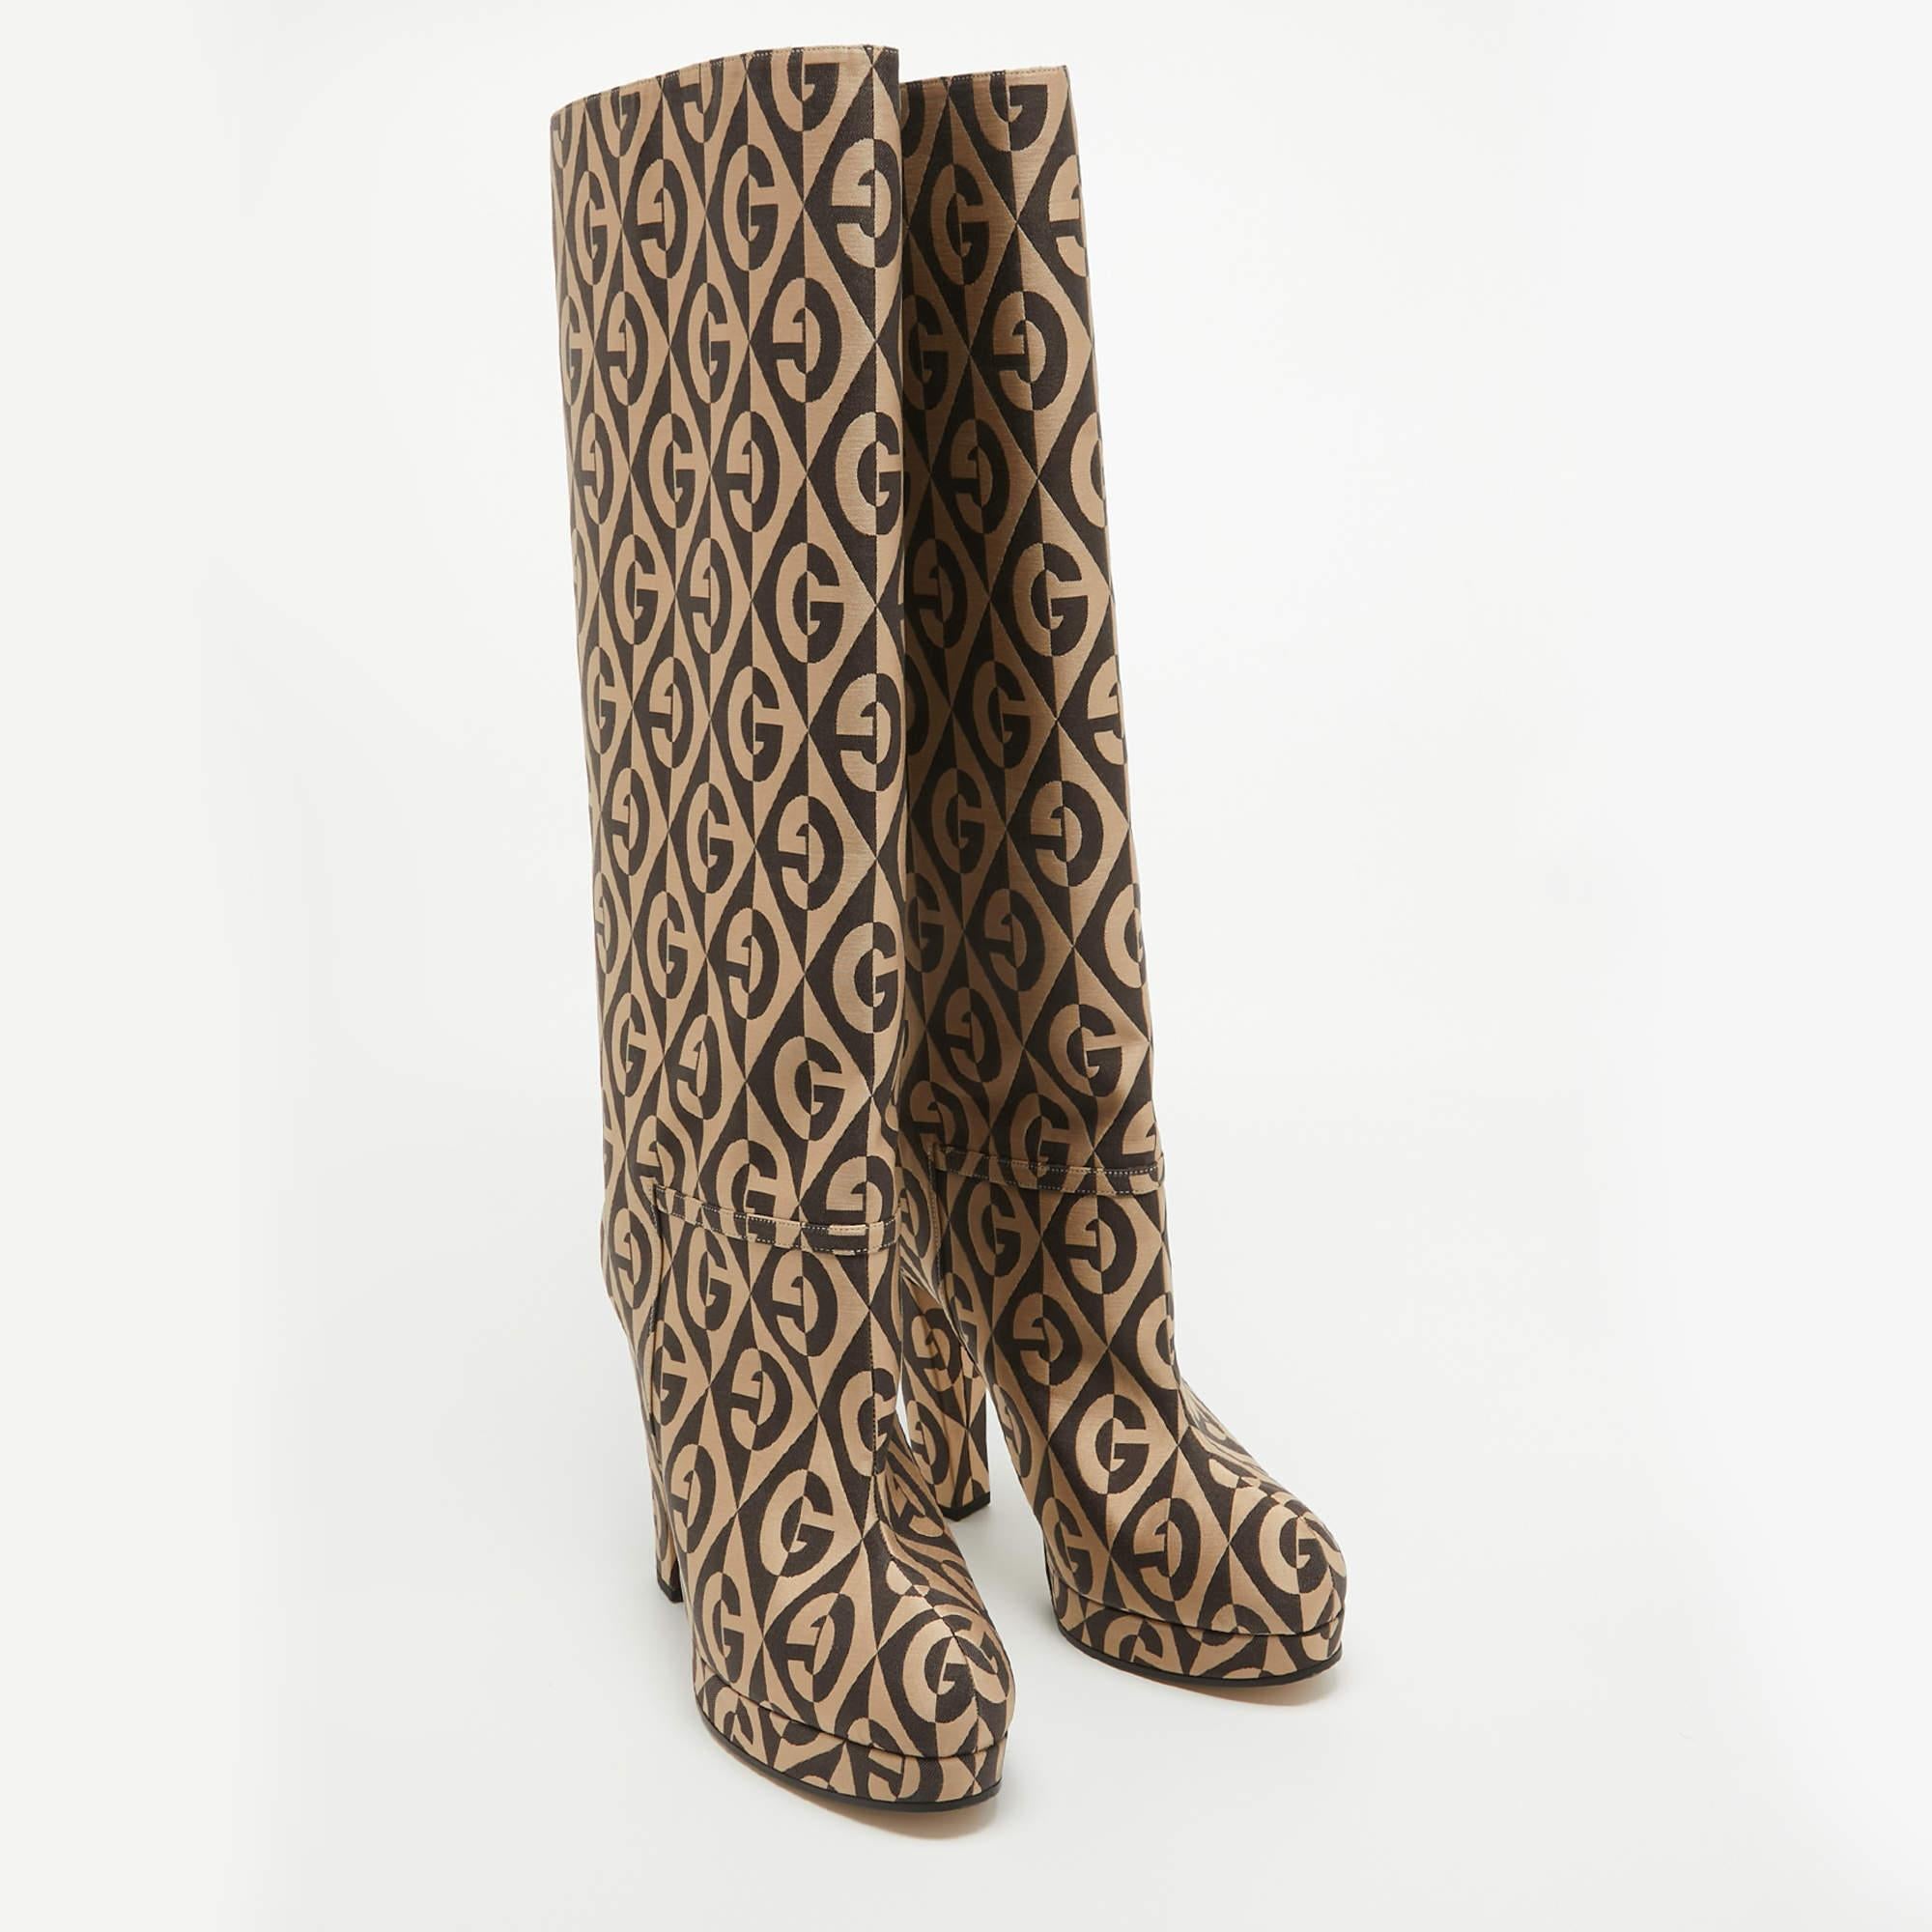 Gucci Beige/Brown Fabric Rhombus Knee Length Platform Boots Size 41 In New Condition For Sale In Dubai, Al Qouz 2